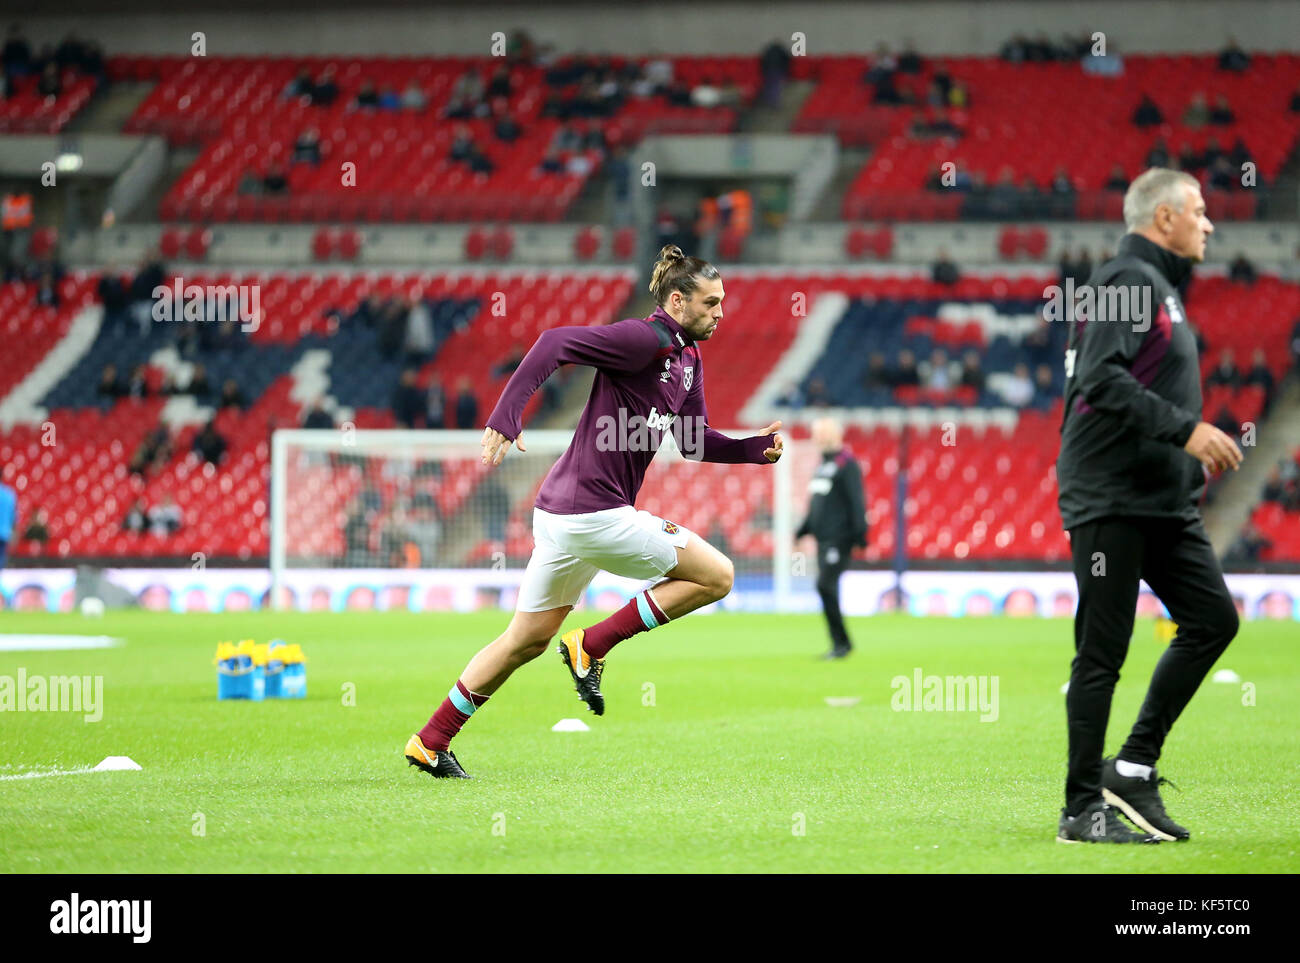 West Ham United's Andy Carroll warms up prior to the Carabao Cup, Fourth Round match at Wembley, London. PRESS ASSOCIATION Photo. Picture date: Wednesday October 25, 2017. See PA story SOCCER Tottenham. Photo credit should read: Steven Paston/PA Wire. RESTRICTIONS: No use with unauthorised audio, video, data, fixture lists, club/league logos or 'live' services. Online in-match use limited to 75 images, no video emulation. No use in betting, games or single club/league/player publications. Stock Photo